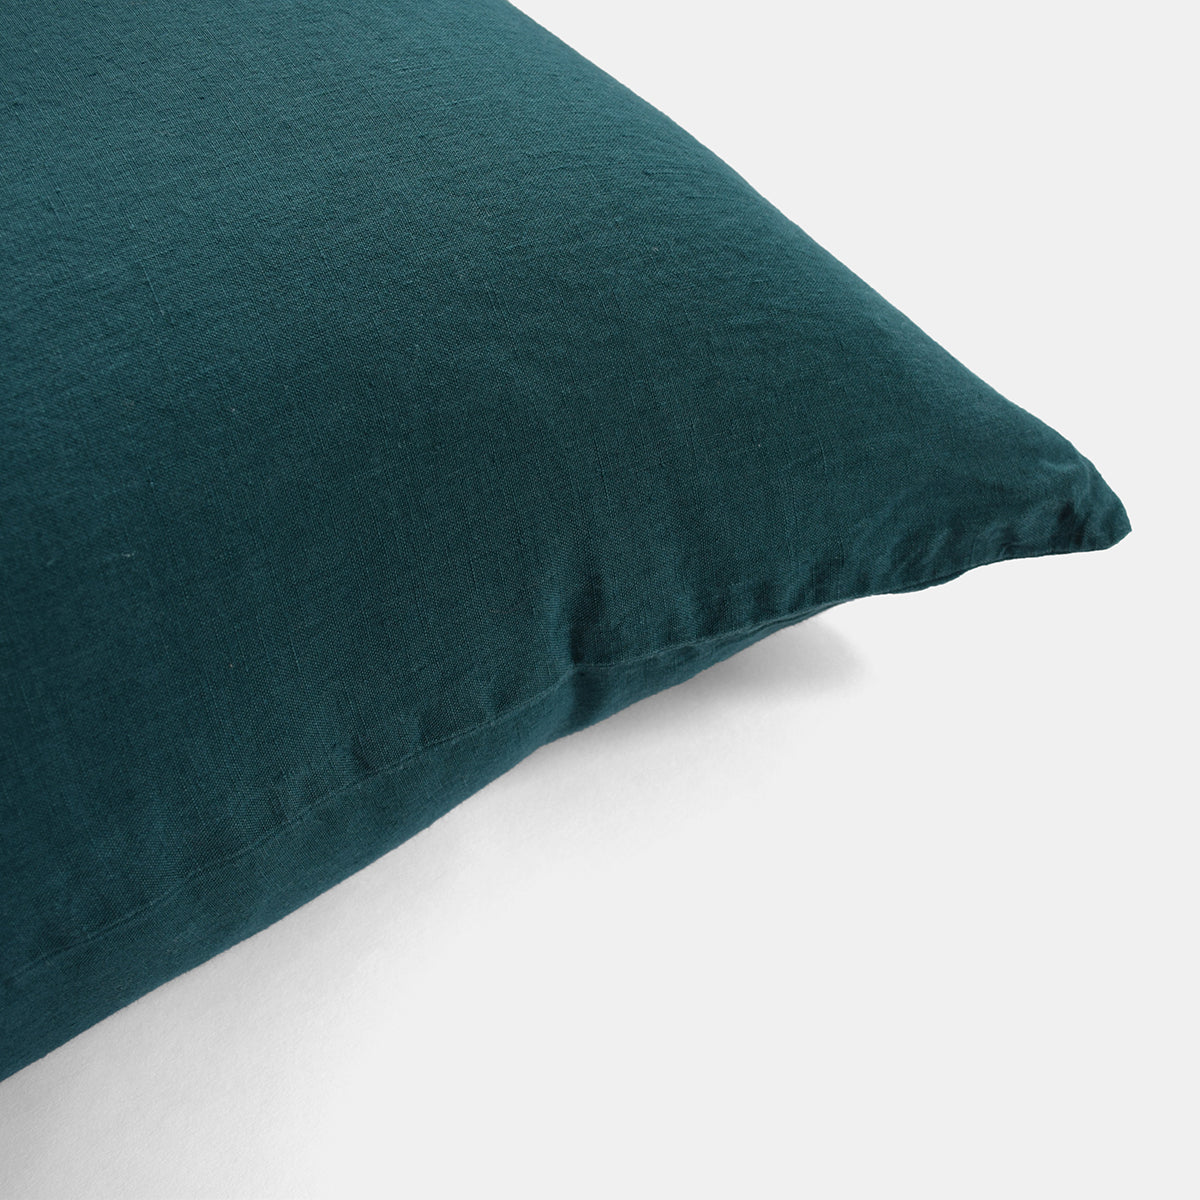 Linge Particulier Vintage Green Euro Linen Pillowcase Sham for a colorful linen bedding look in deep teal green - Collyer&#39;s Mansion